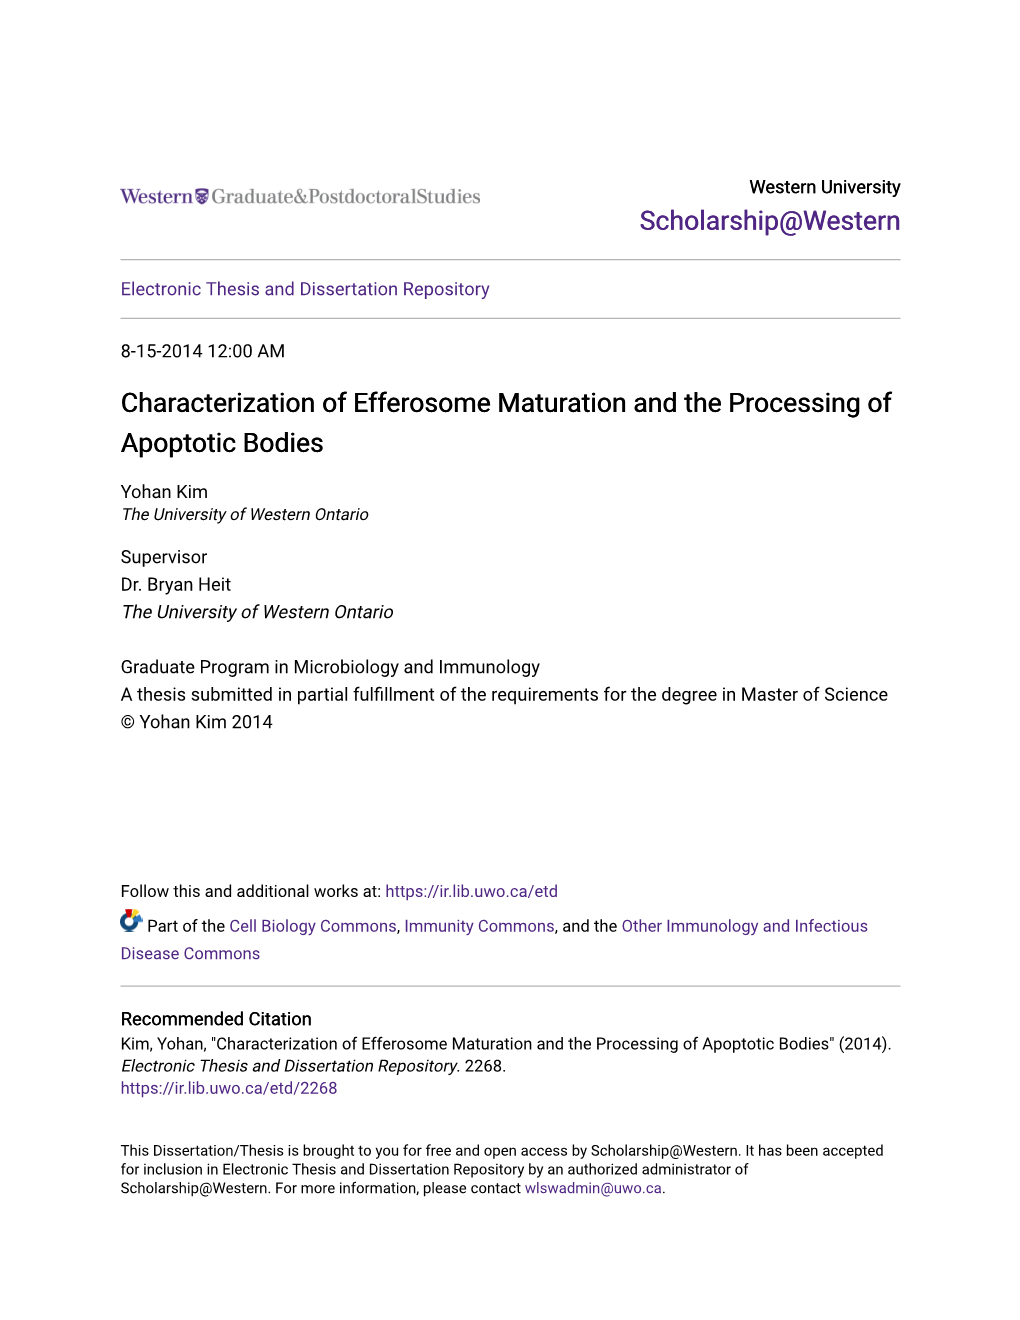 Characterization of Efferosome Maturation and the Processing of Apoptotic Bodies